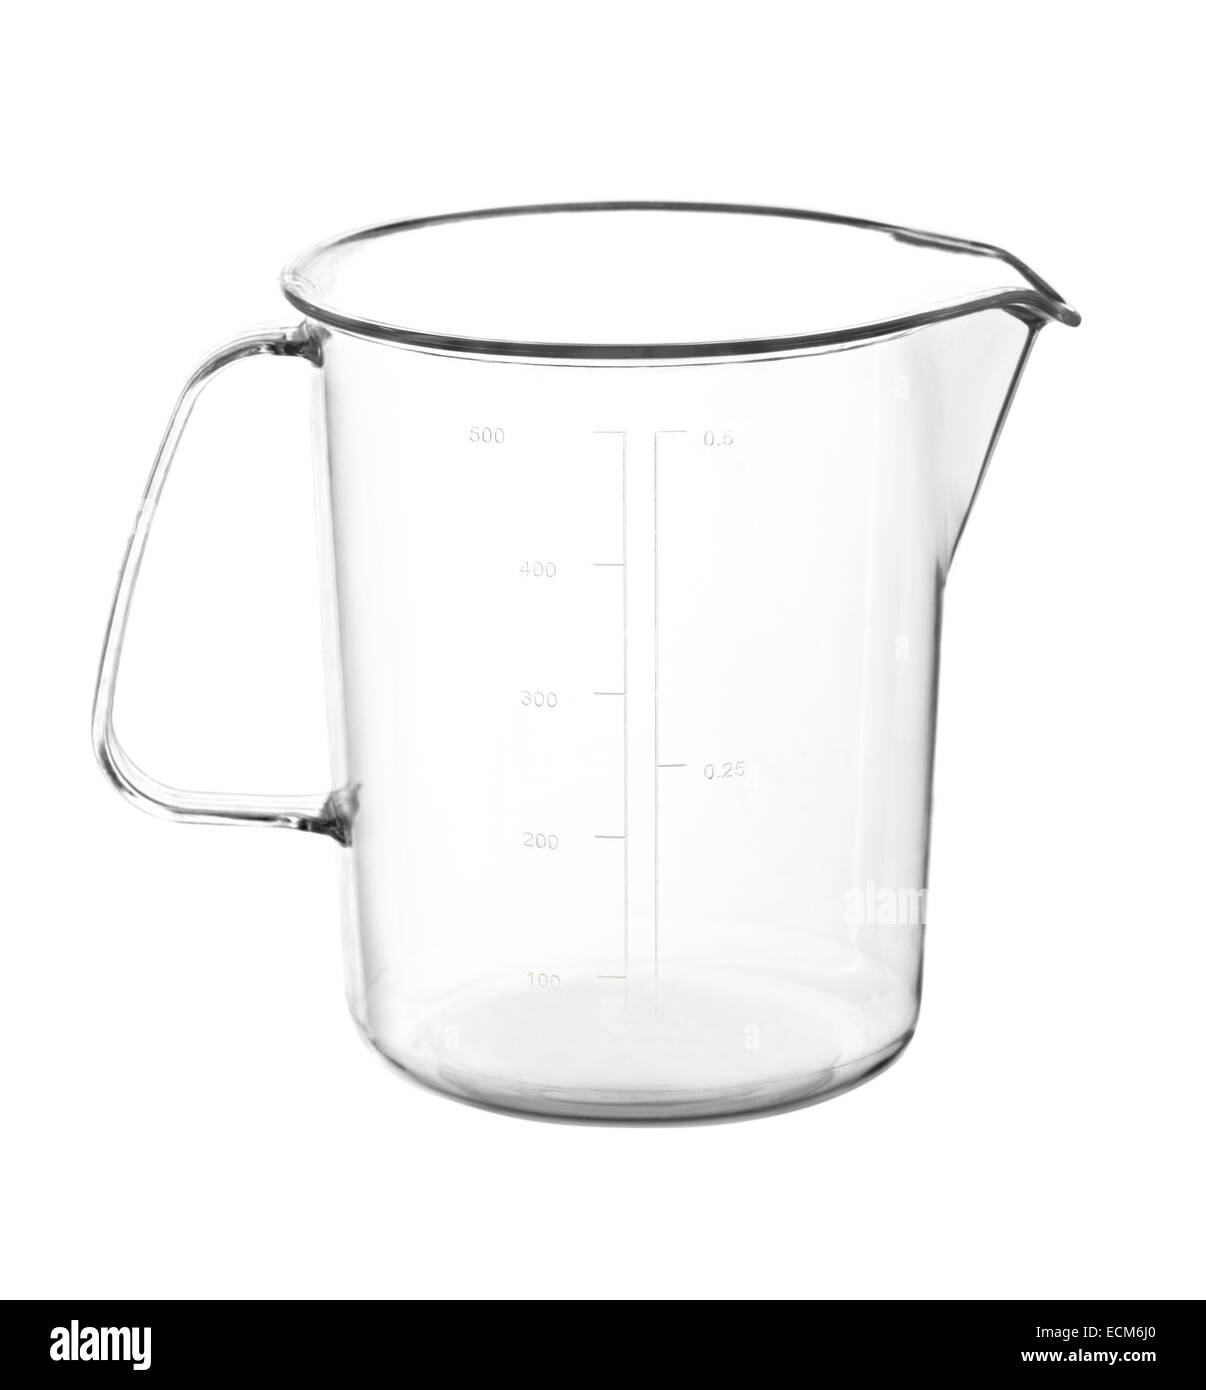 Large Capacity Glass Measuring Cup With Scale, Handle, Milliliter